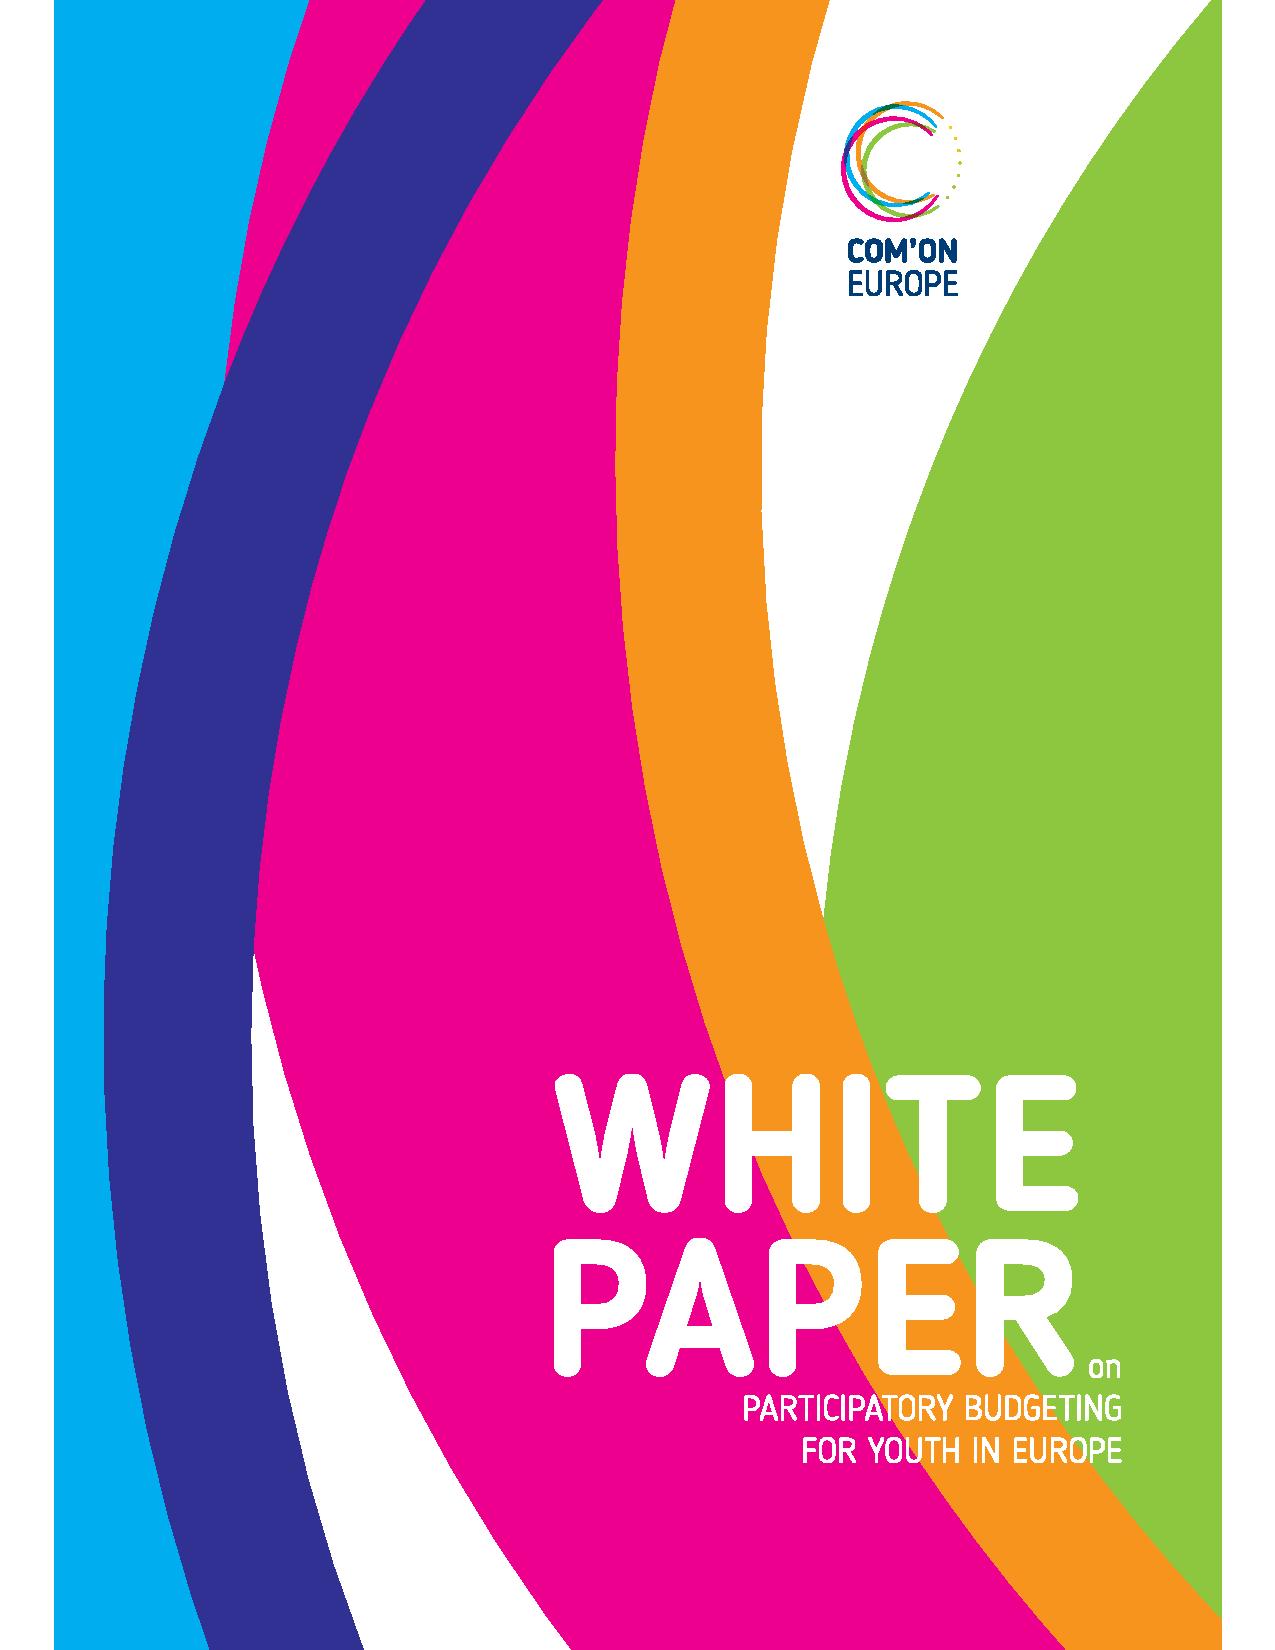 White Paper on Participatory Budgeting for Youth in Europe - Bulgarian version